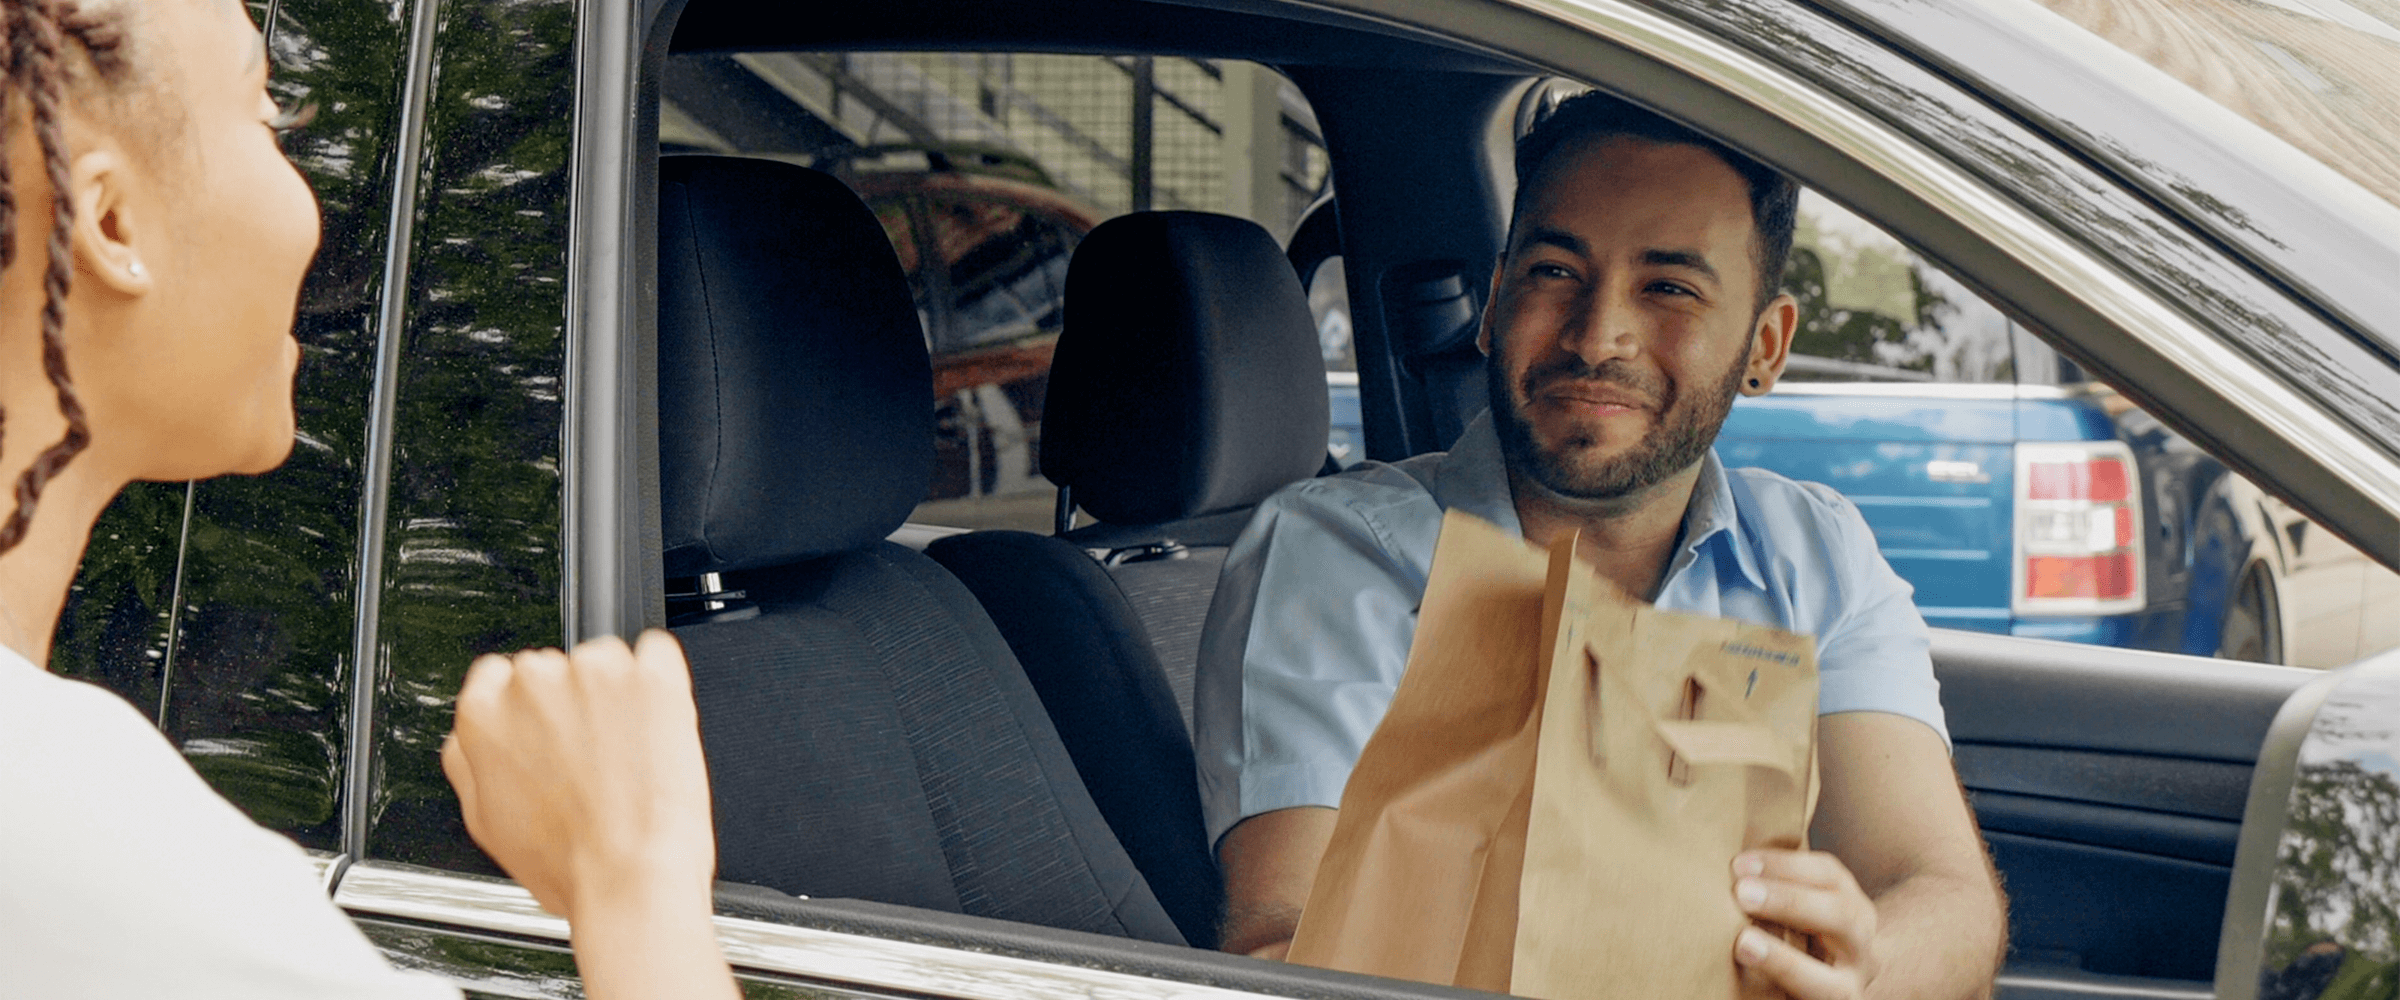 Smiling man in his 30s receives grocery bag through his car window